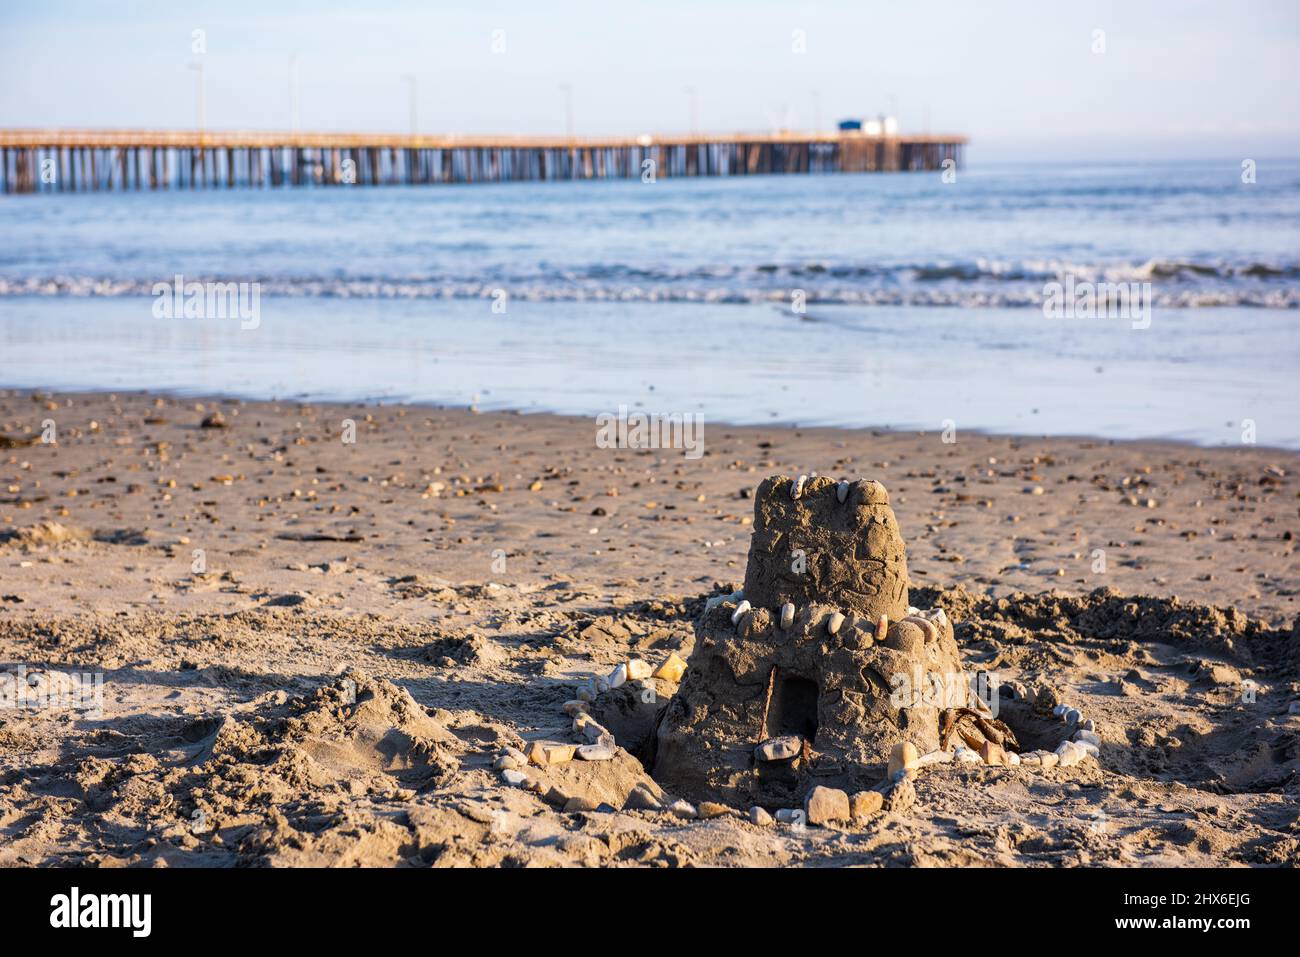 Two-story sand castle decorated with shells on Avila Beach shore, with pier in the background. Stock Photo